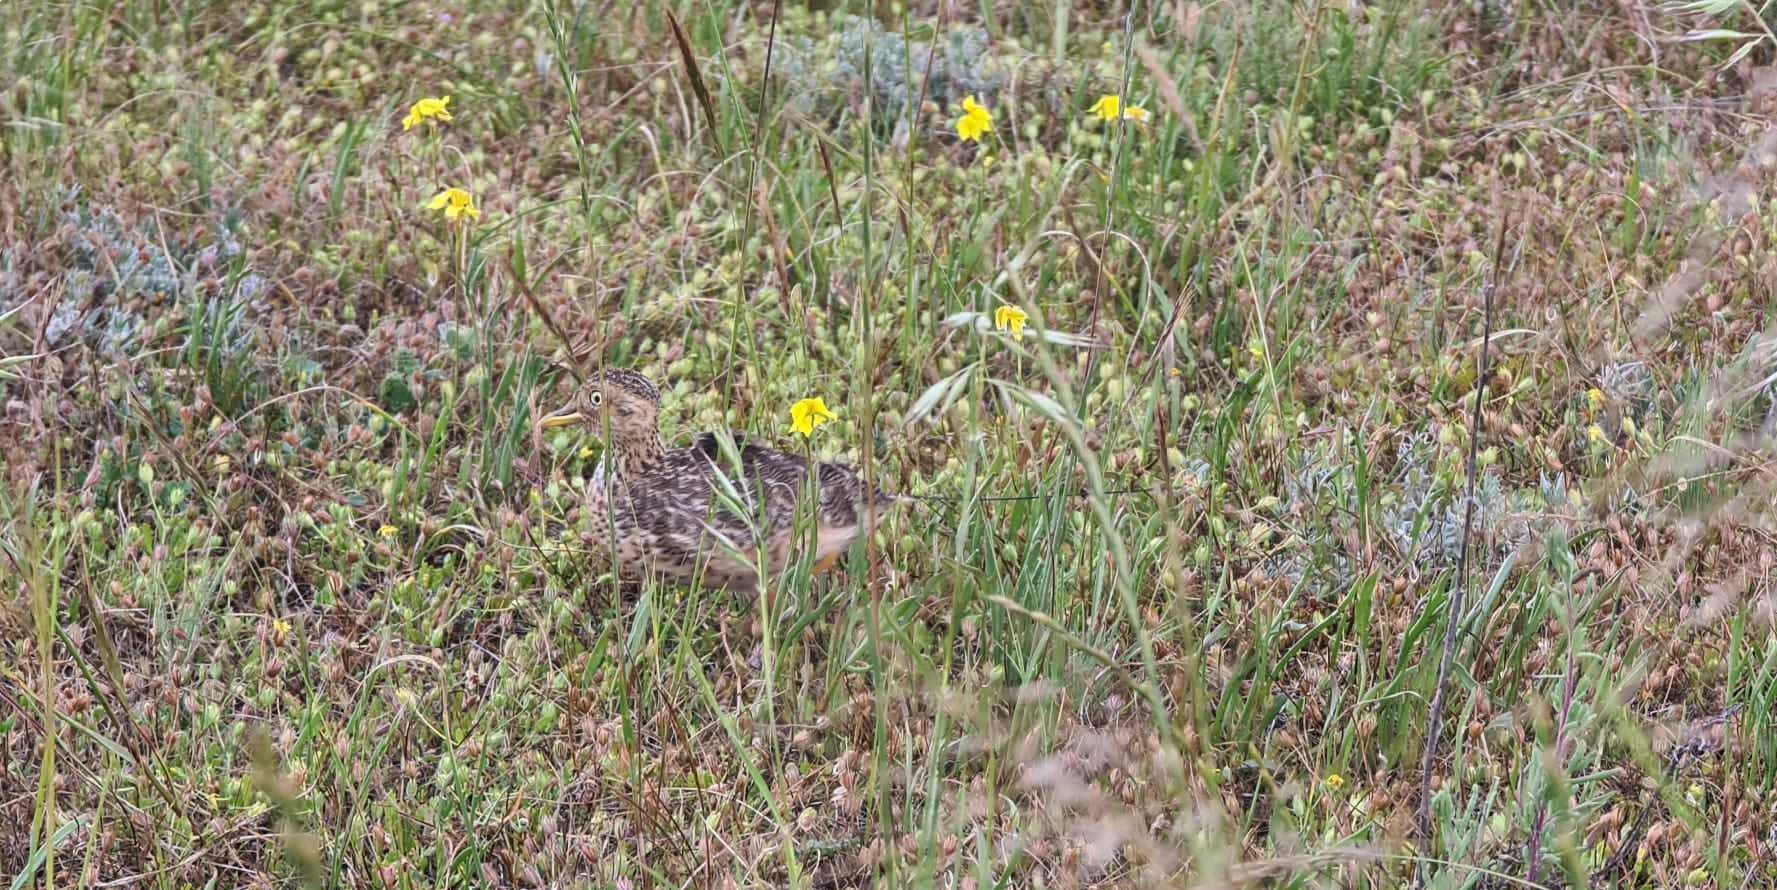 Plains-wanderer released in the Northern Plains of Victoria